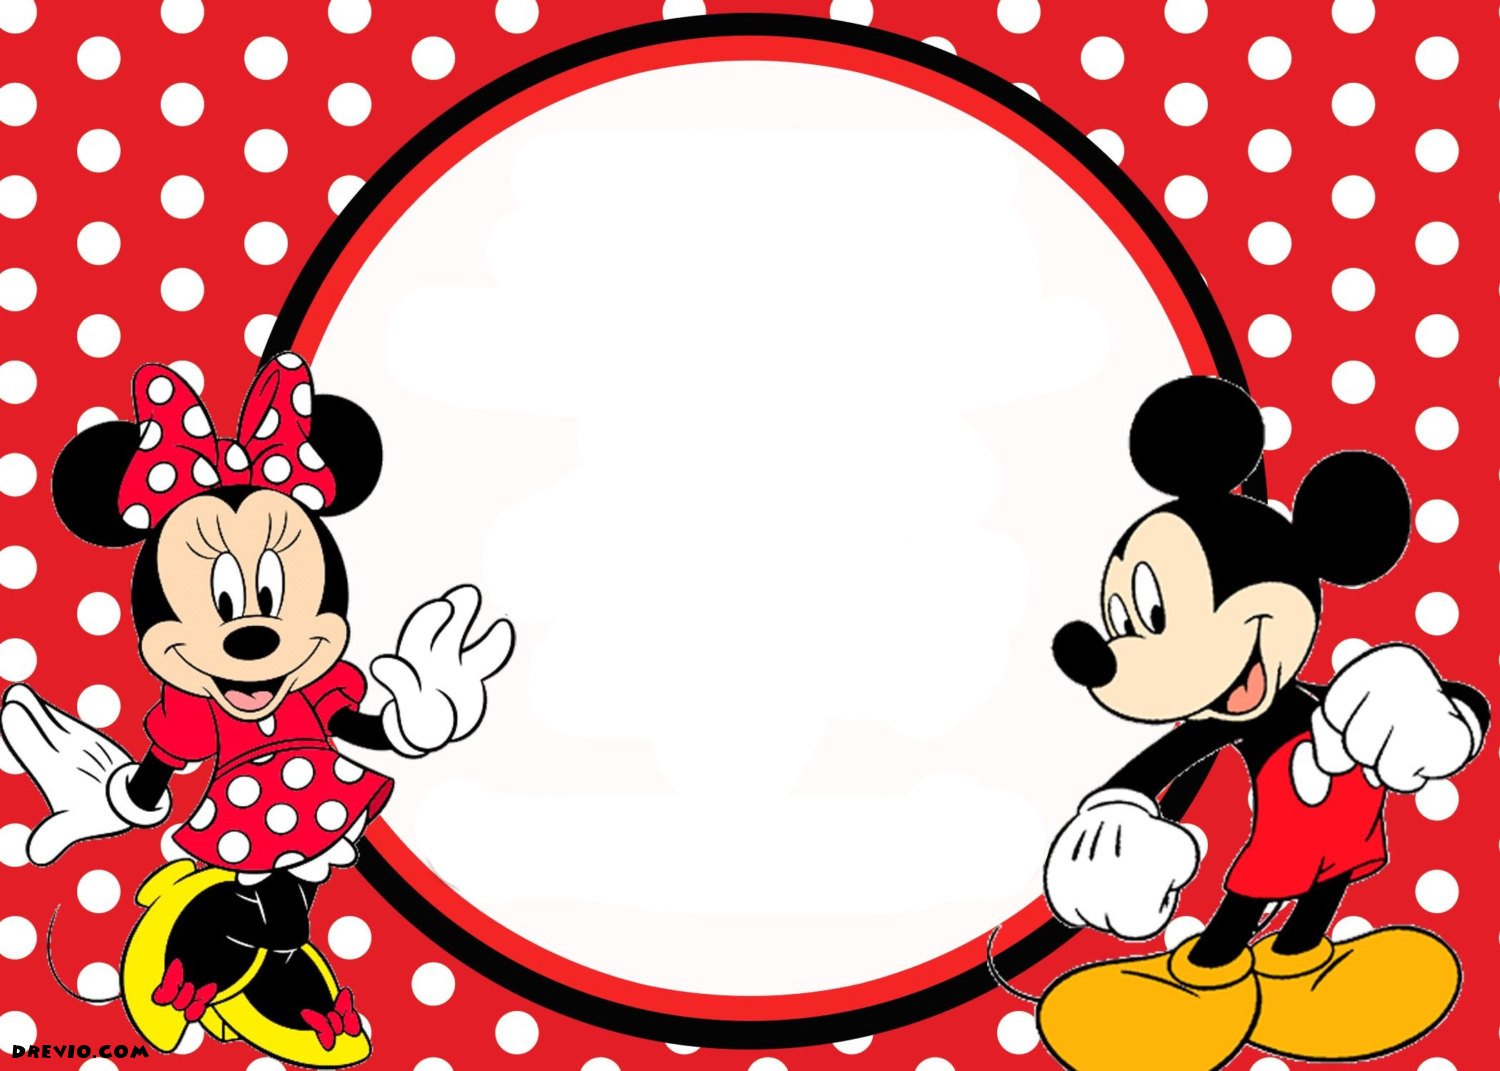 FREE Printable Mickey Mouse Invitations - Exclusive Selectio